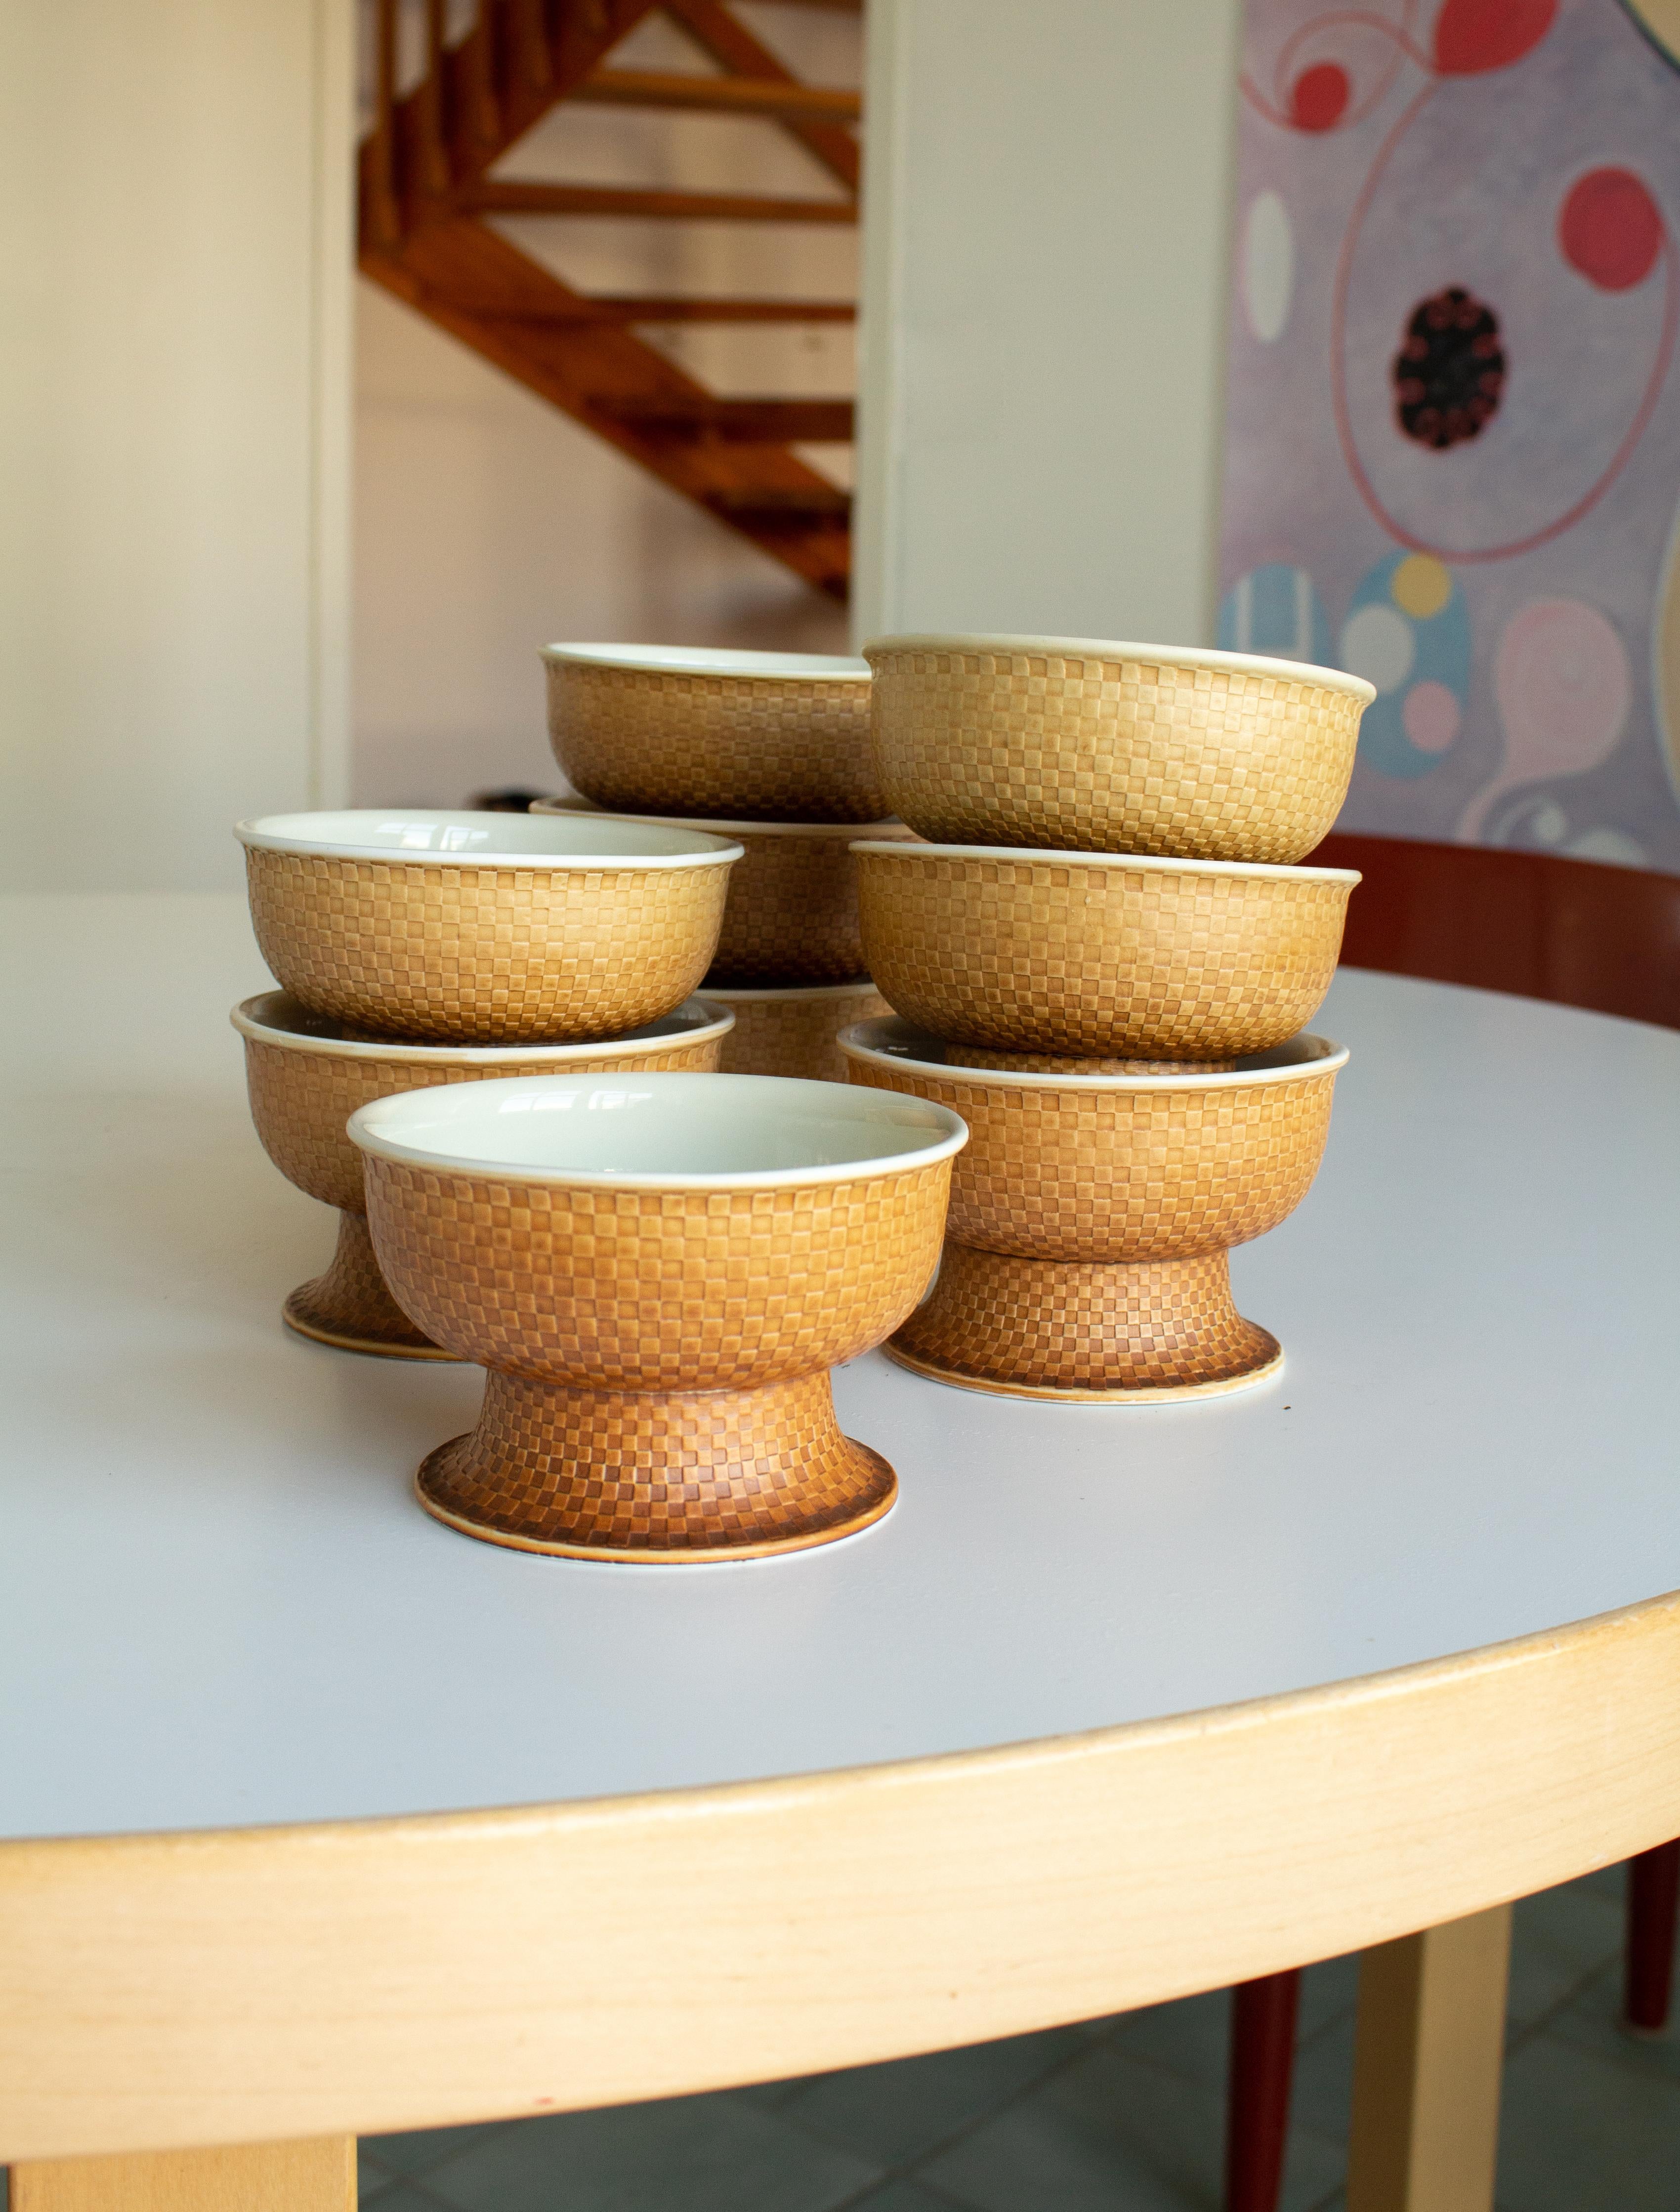 Late 20th Century 12 Bowls with Terracotta Glaze by Signe Persson Melin for Boda Nova, Sweden For Sale